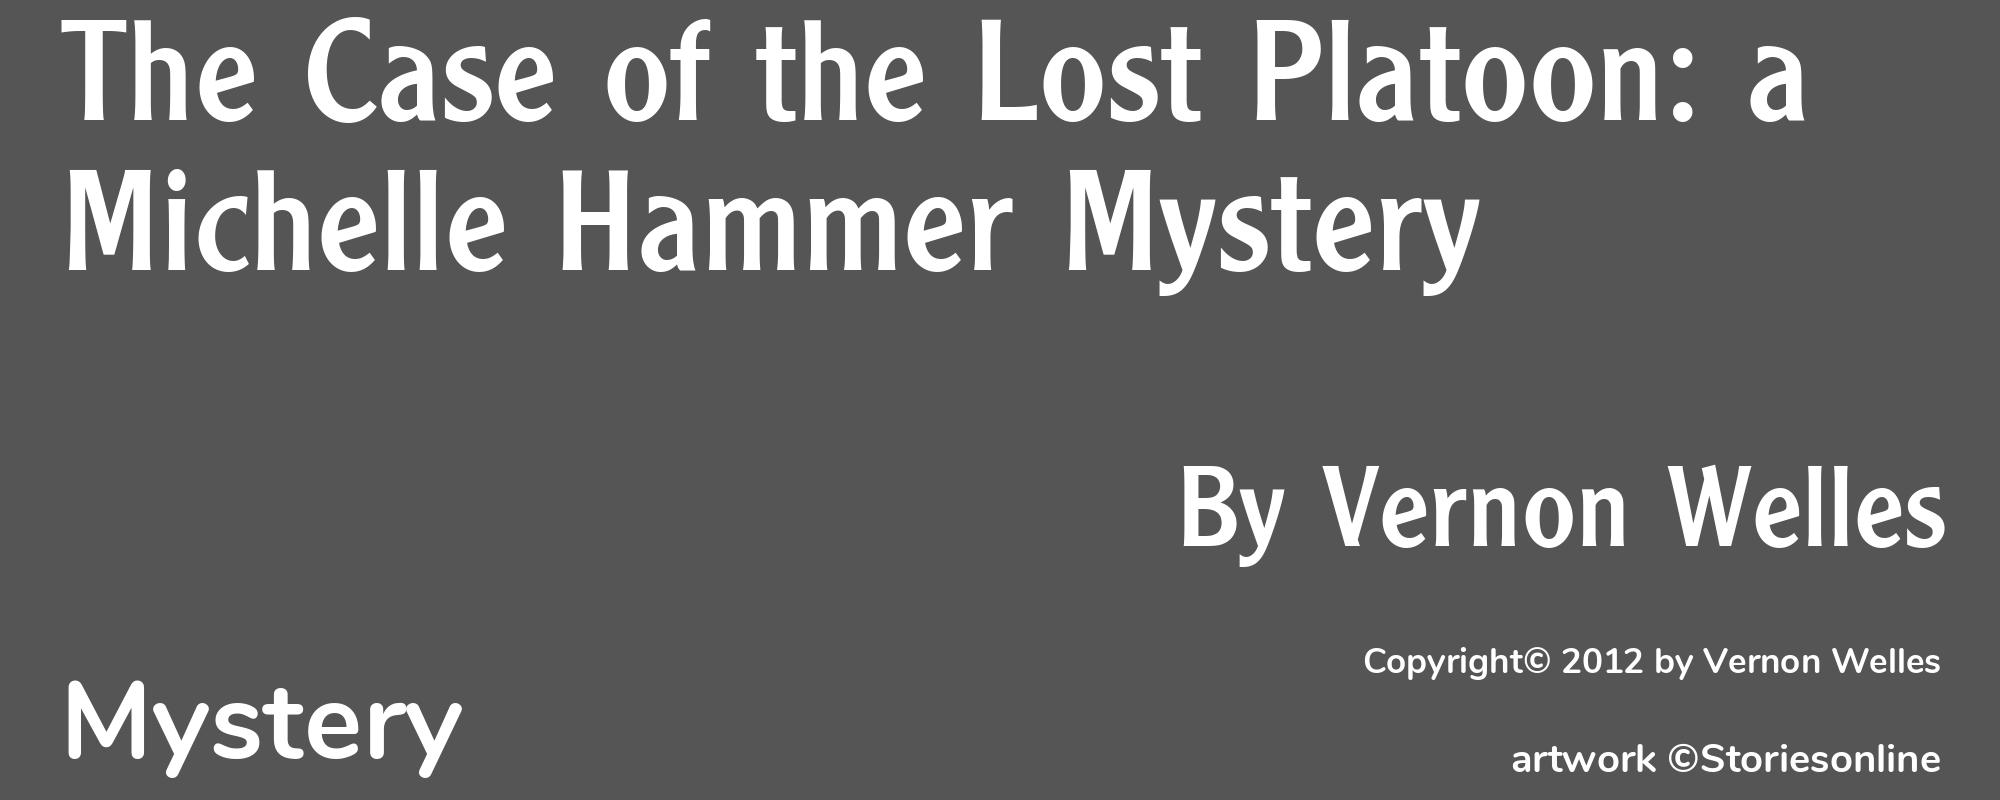 The Case of the Lost Platoon: a Michelle Hammer Mystery - Cover